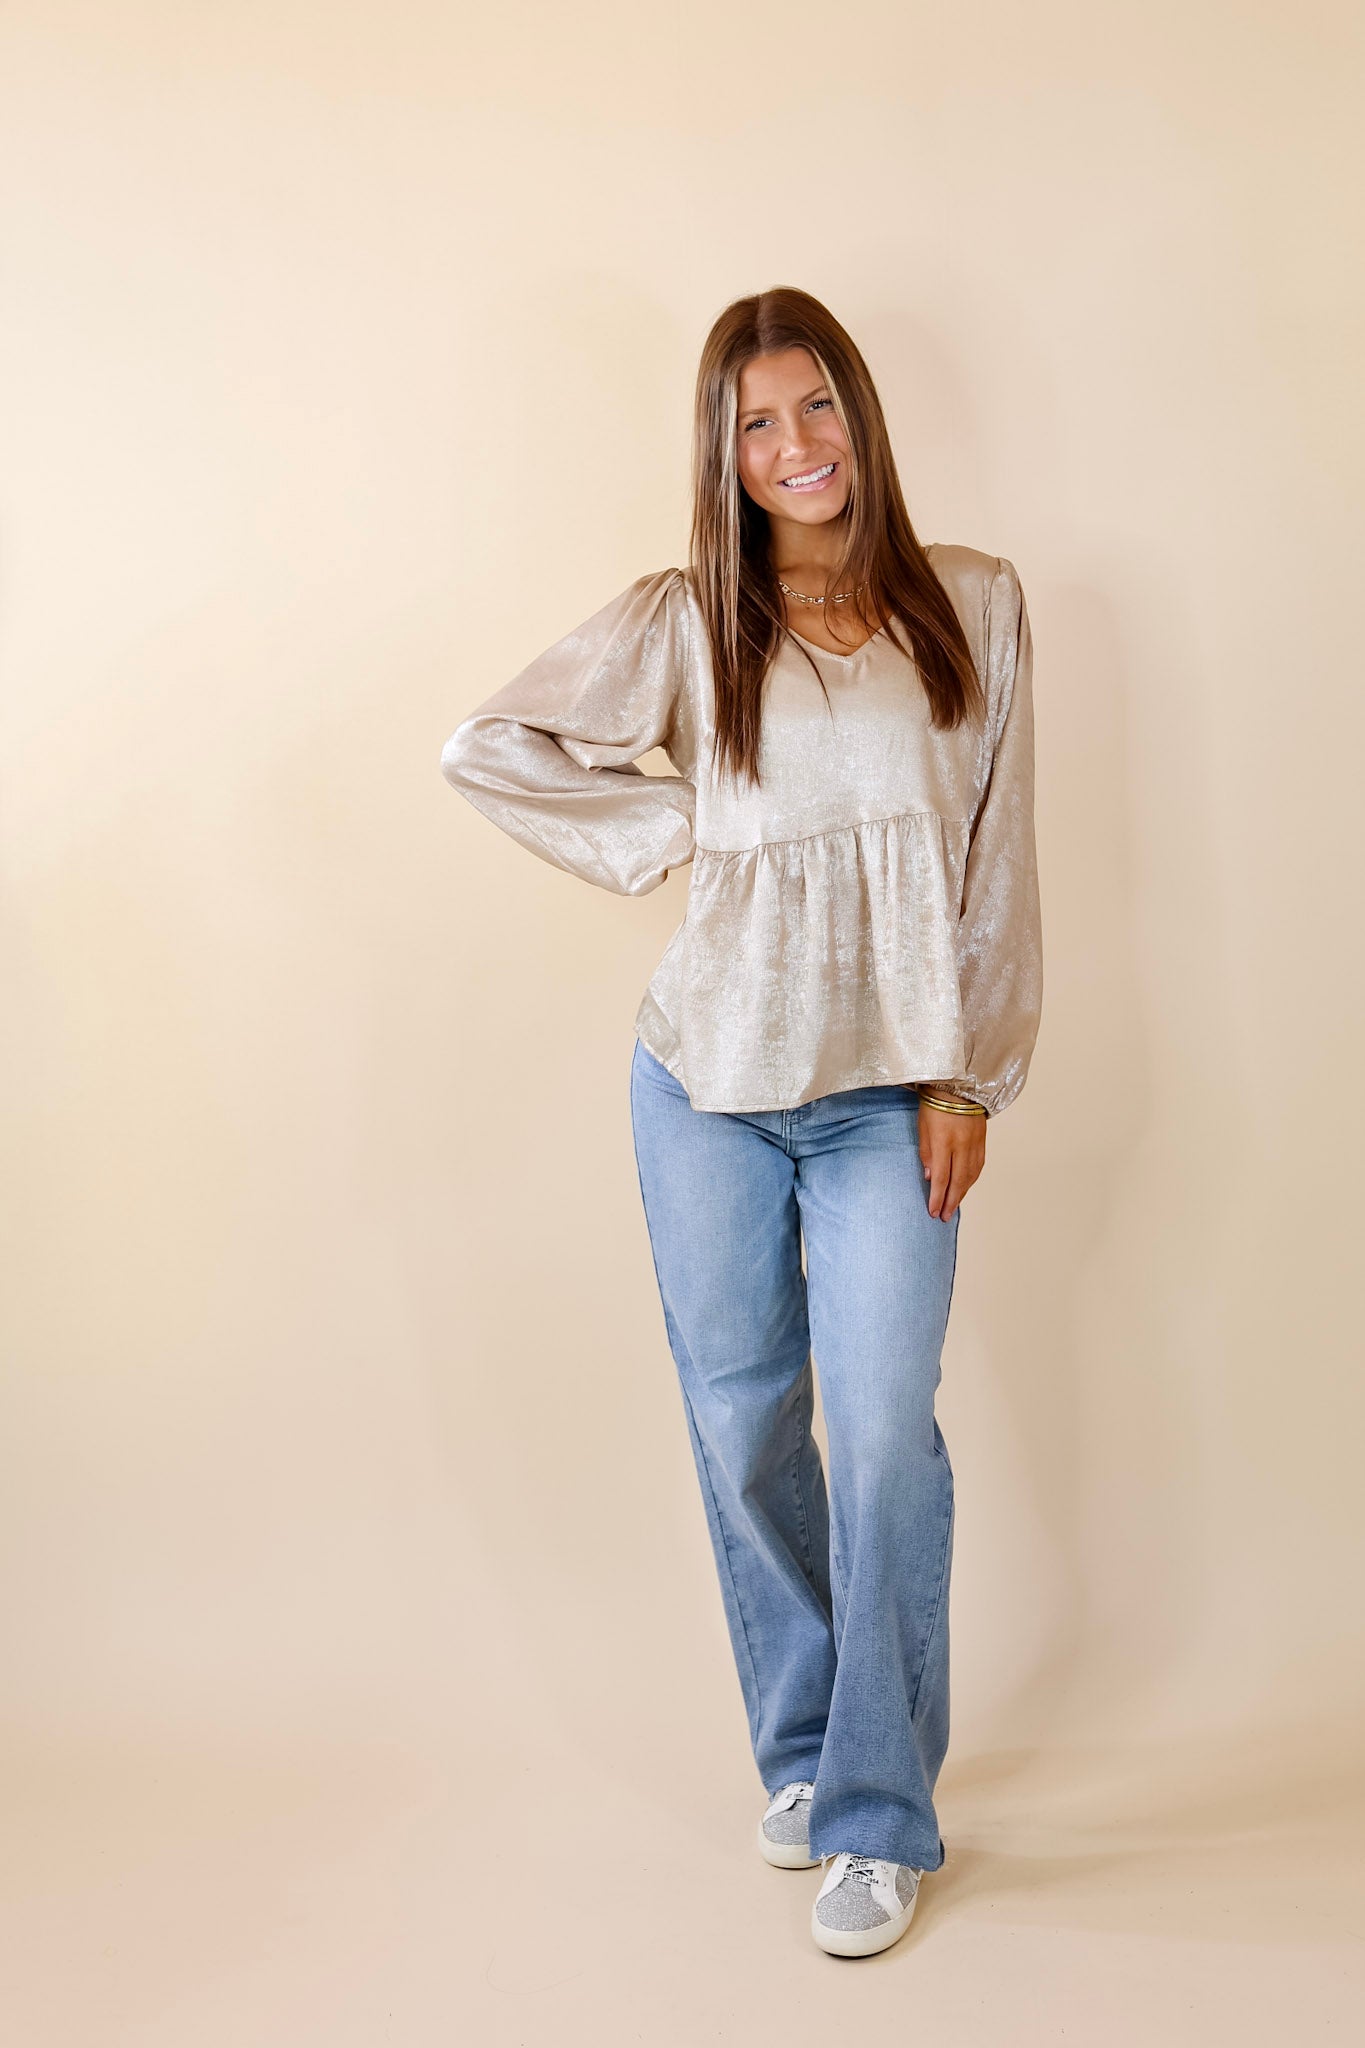 Popular Opinion Metallic V Neck Peplum Top with Long Sleeves in Champagne - Giddy Up Glamour Boutique